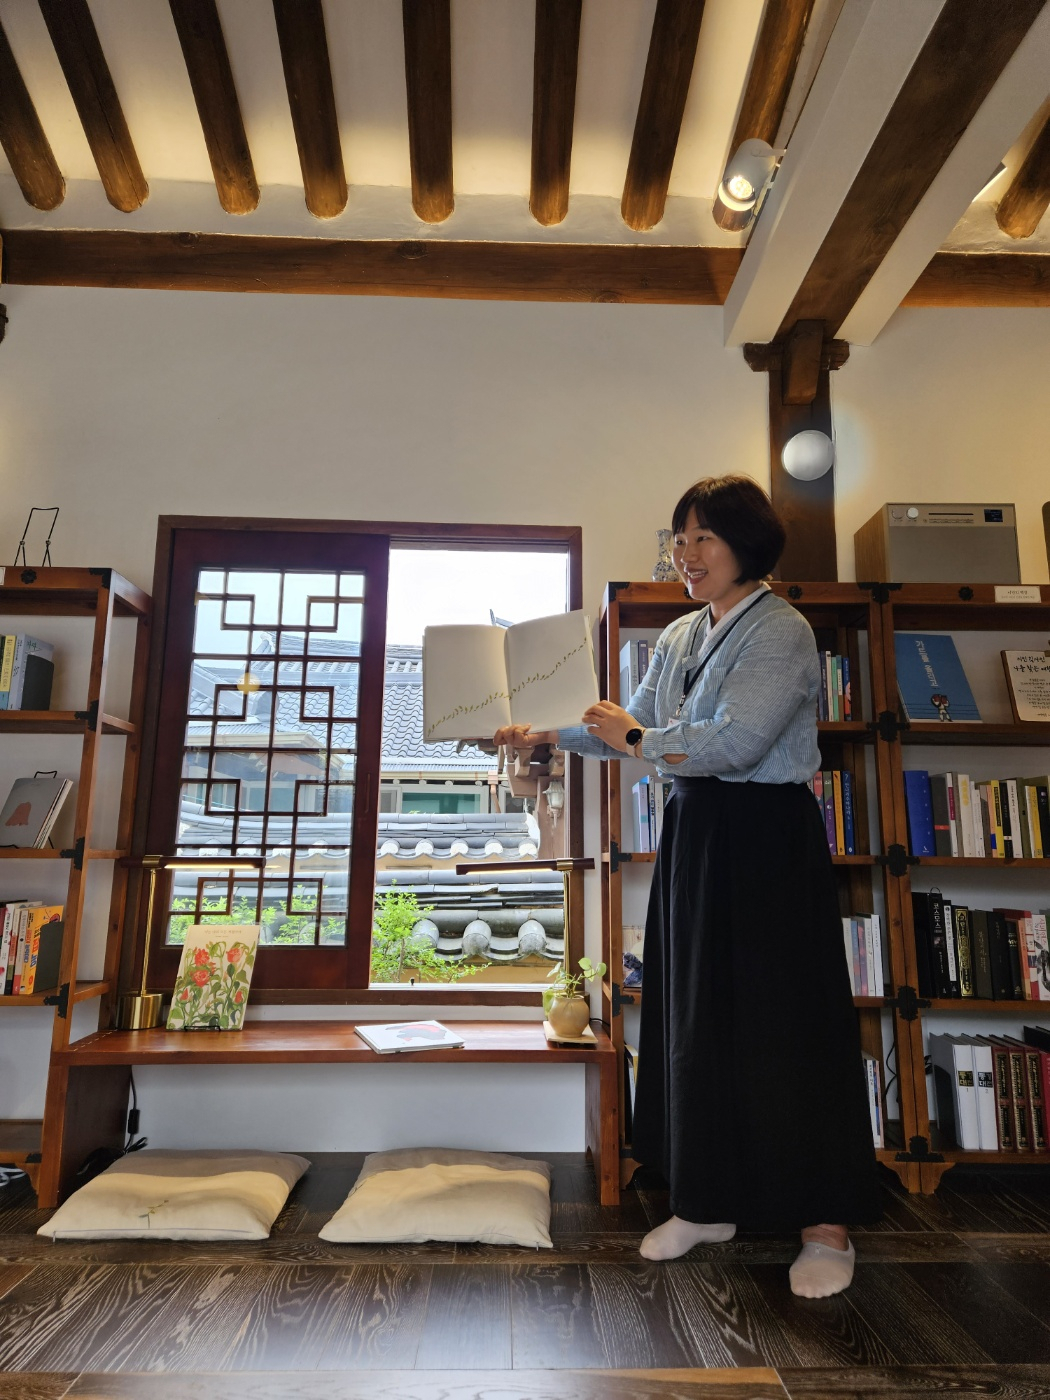 A guide at the Jeonju Library Tour introduces books to visitors. (Kim Hae-yeon/ The Korea Herald)